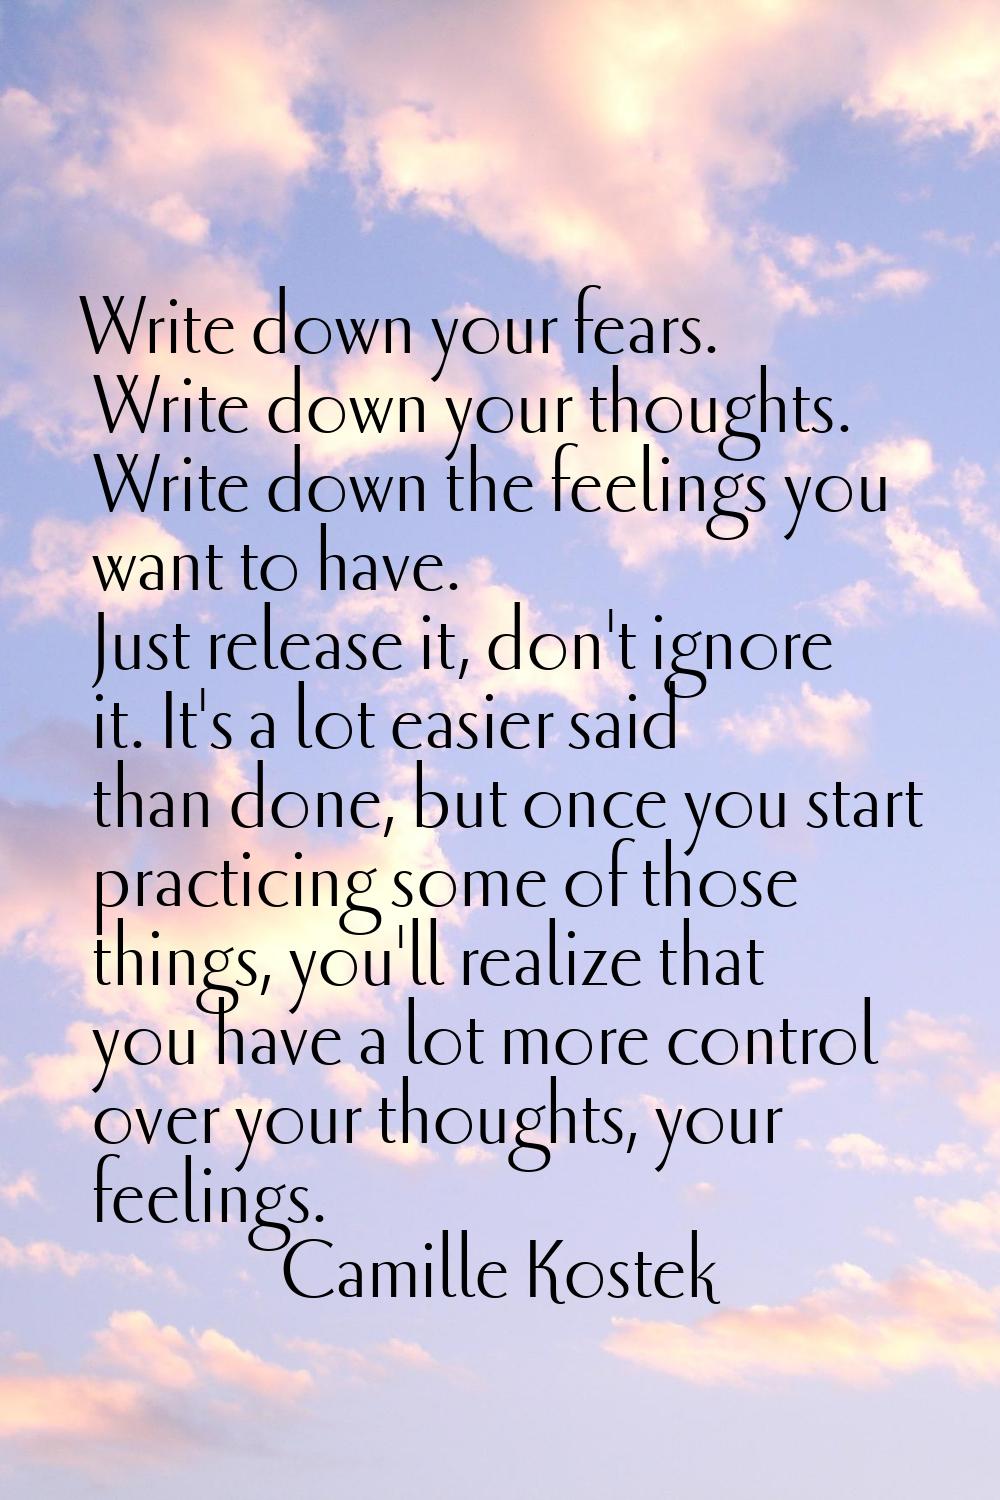 Write down your fears. Write down your thoughts. Write down the feelings you want to have. Just rel